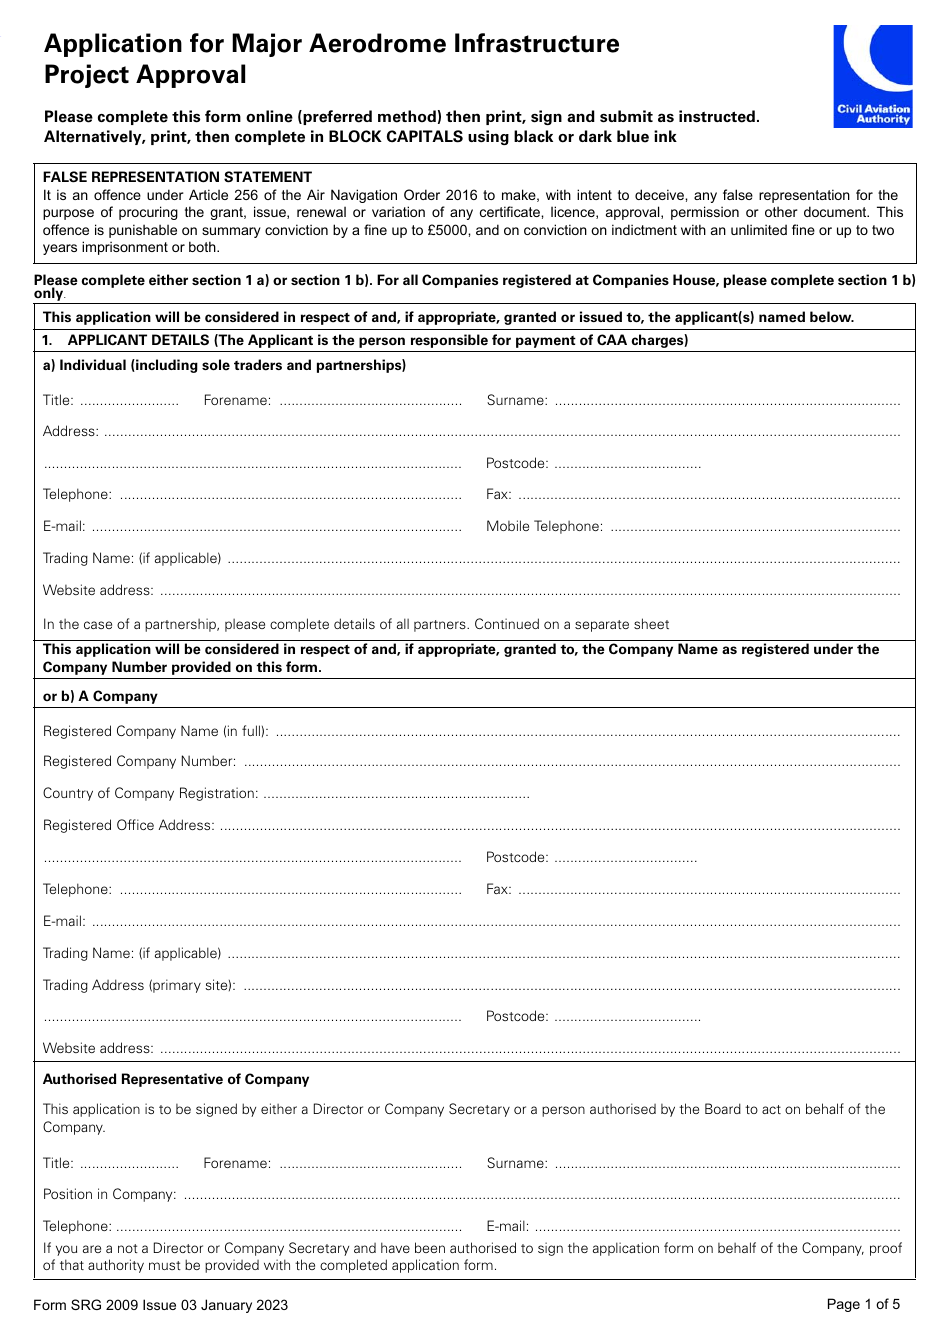 Form SRG2009 Application for Major Aerodrome Infrastructure Project Approval - United Kingdom, Page 1